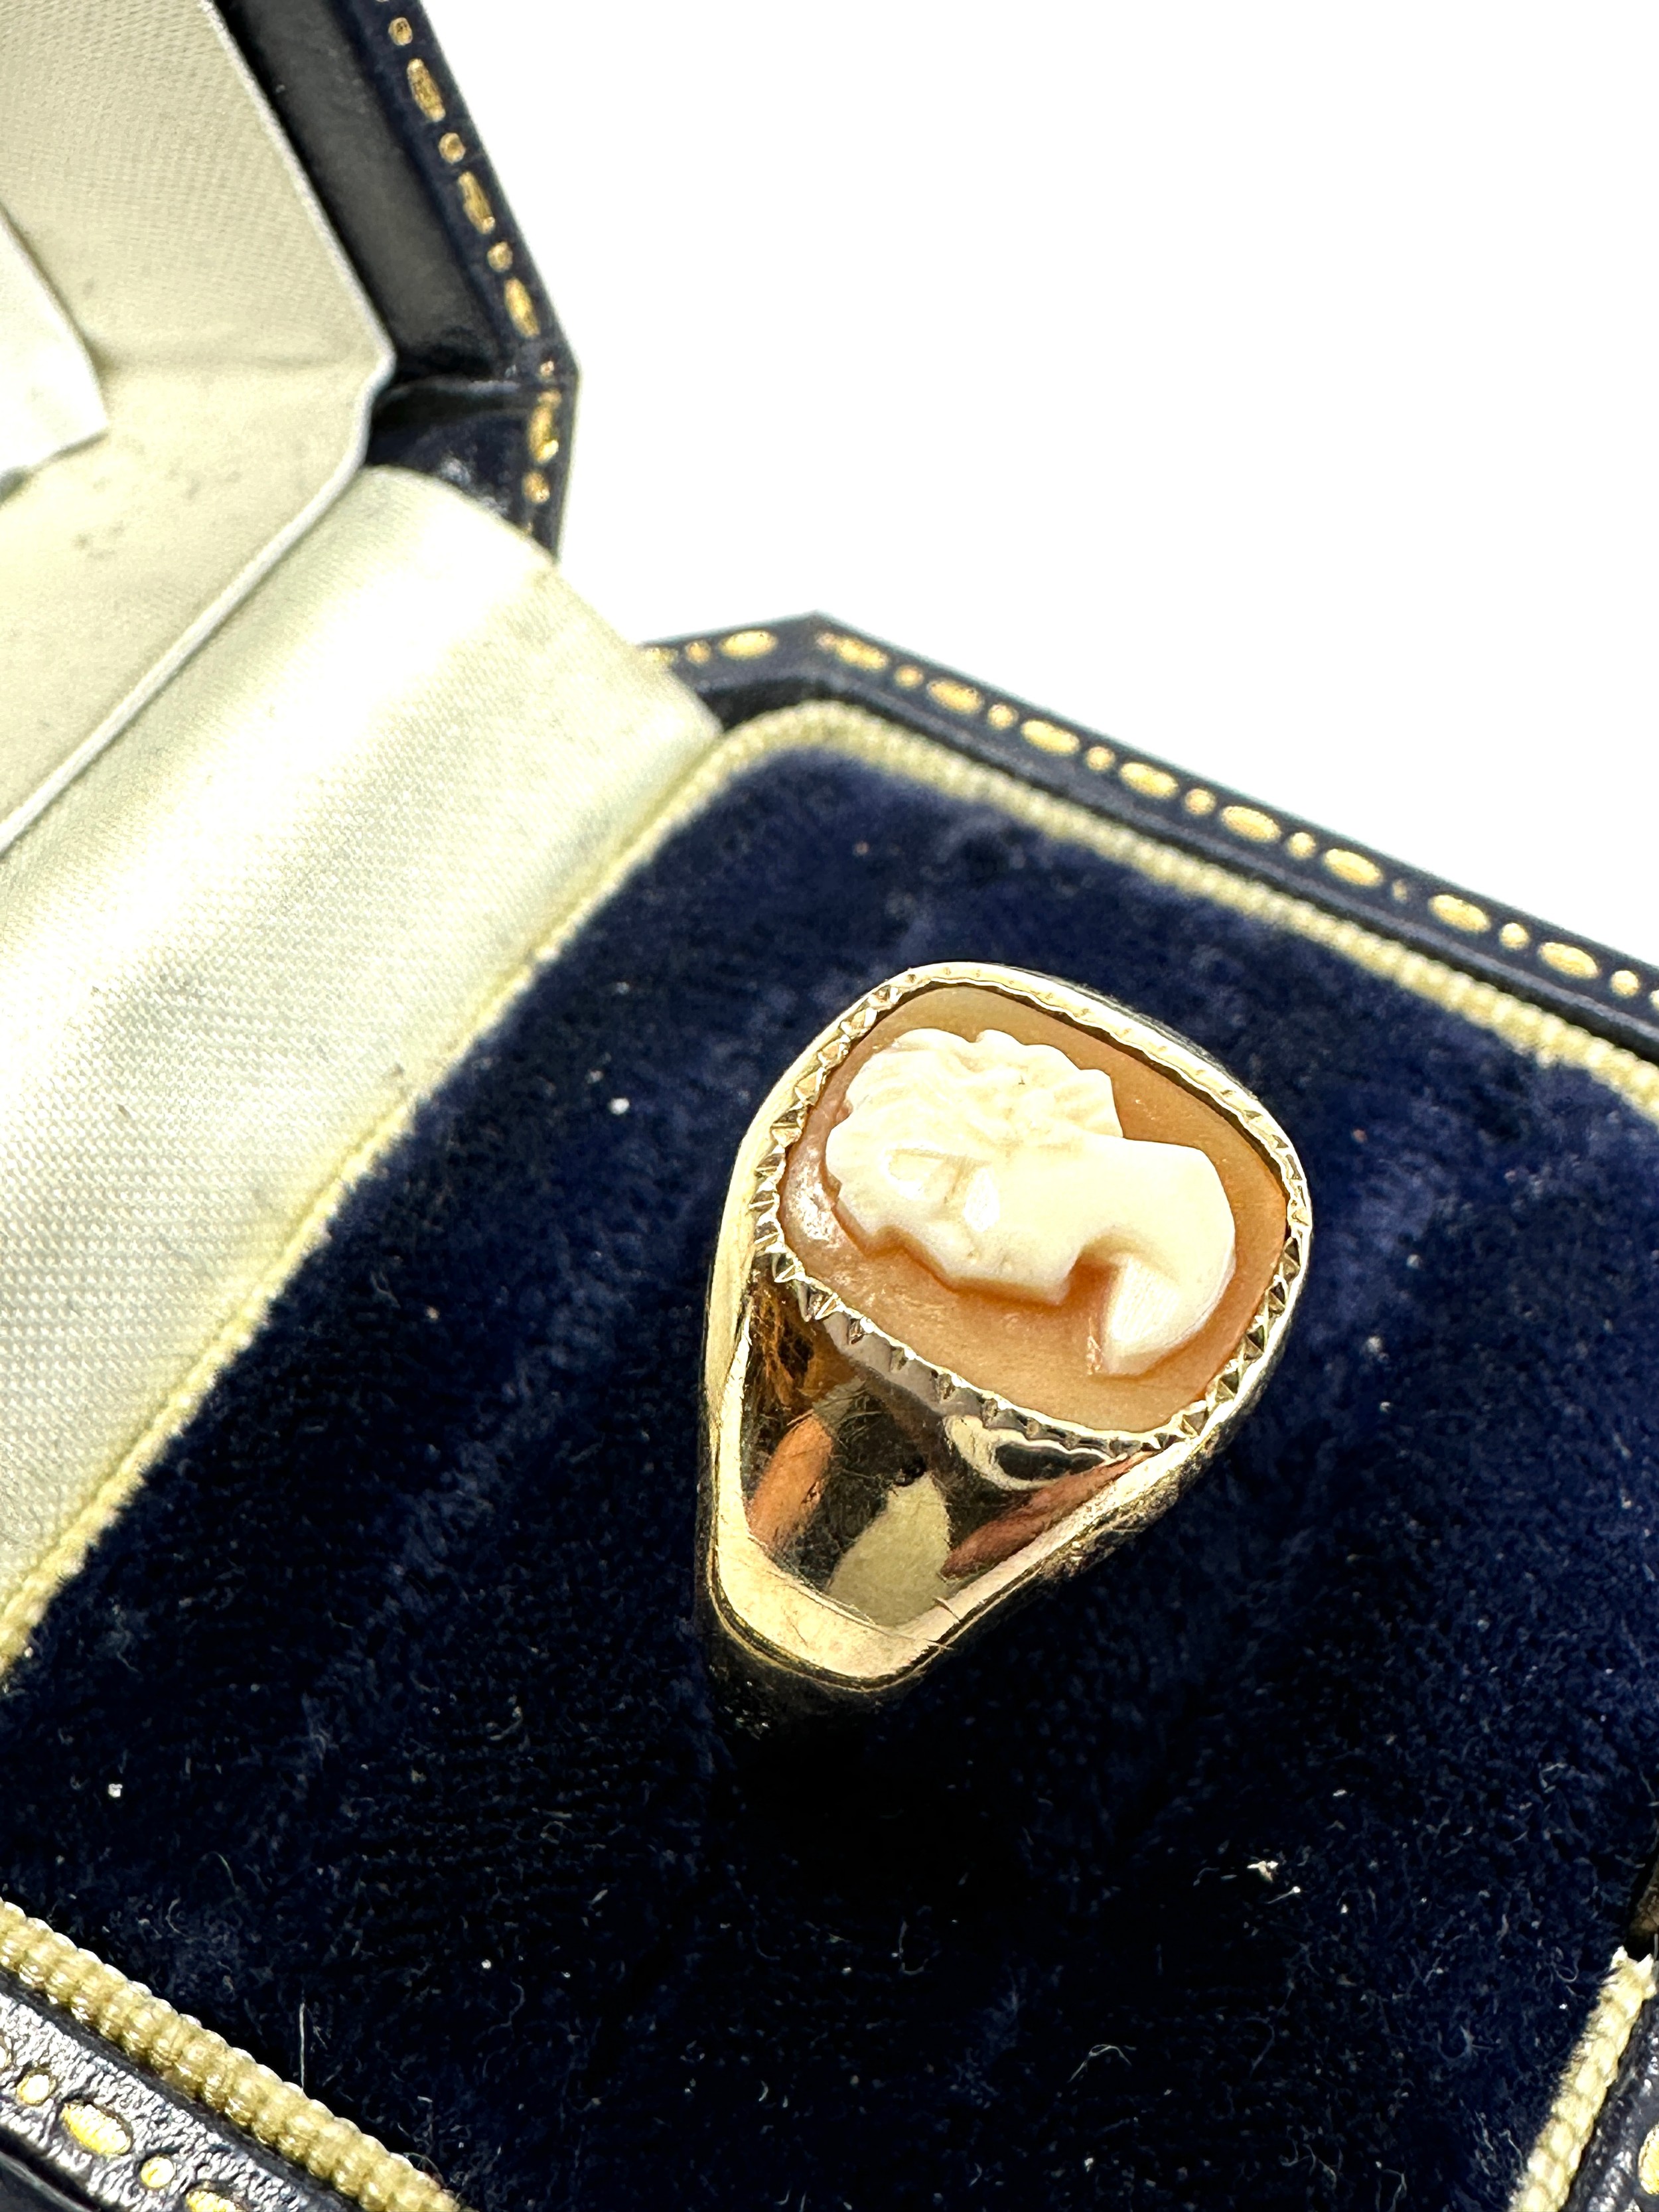 9ct Gold Cameo Ring (2.4g) - Image 2 of 3